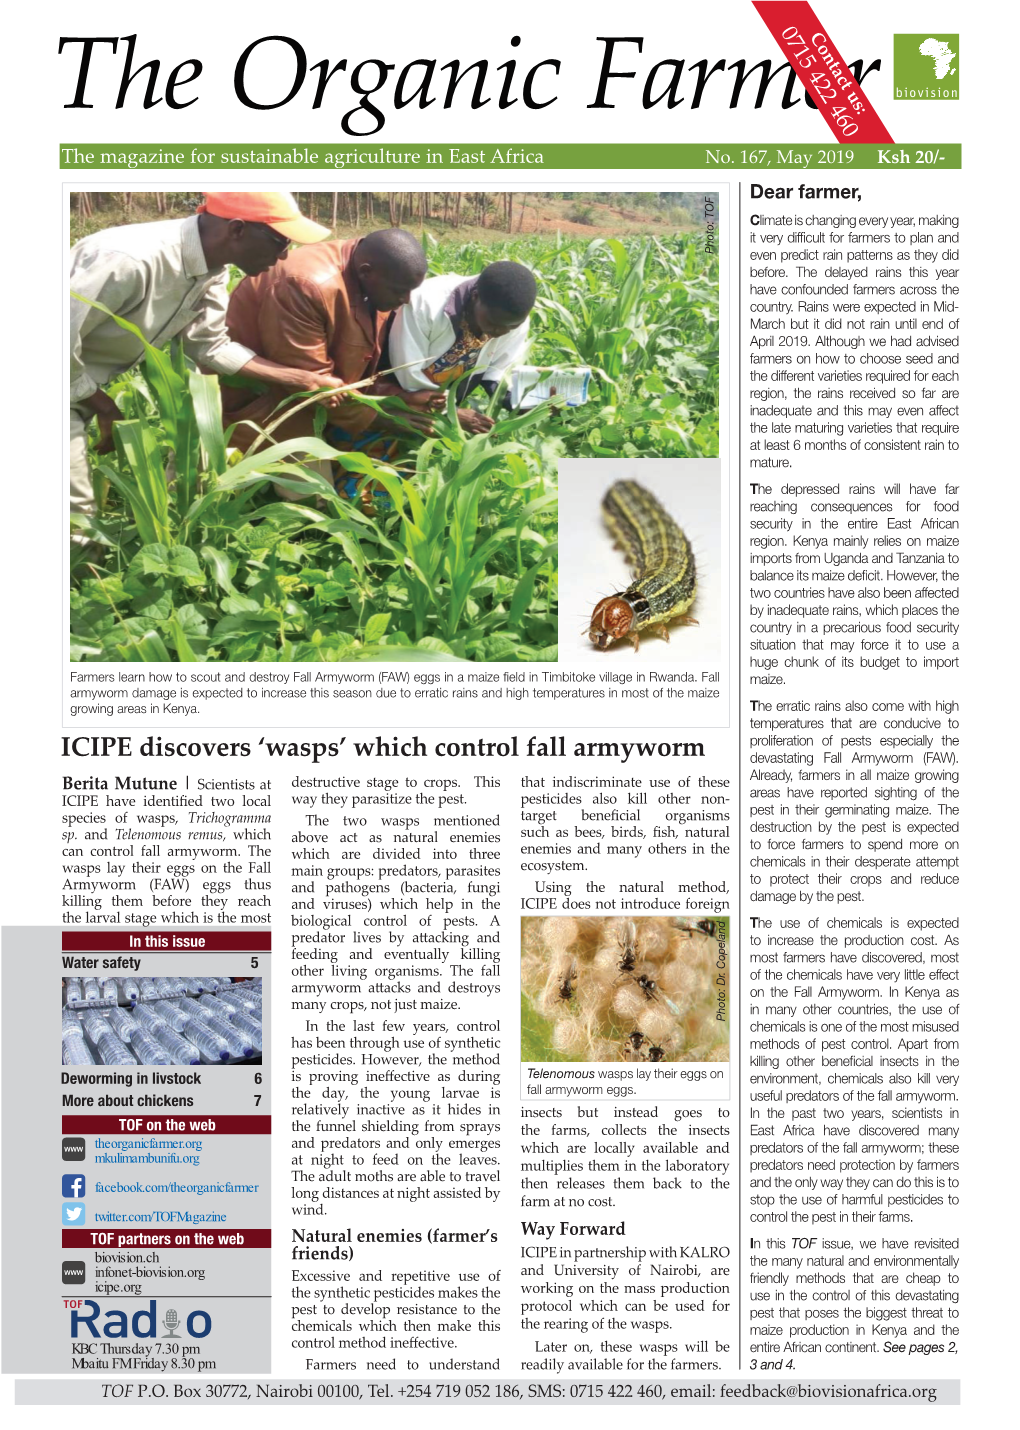 ICIPE Discovers 'Wasps' Which Control Fall Armyworm